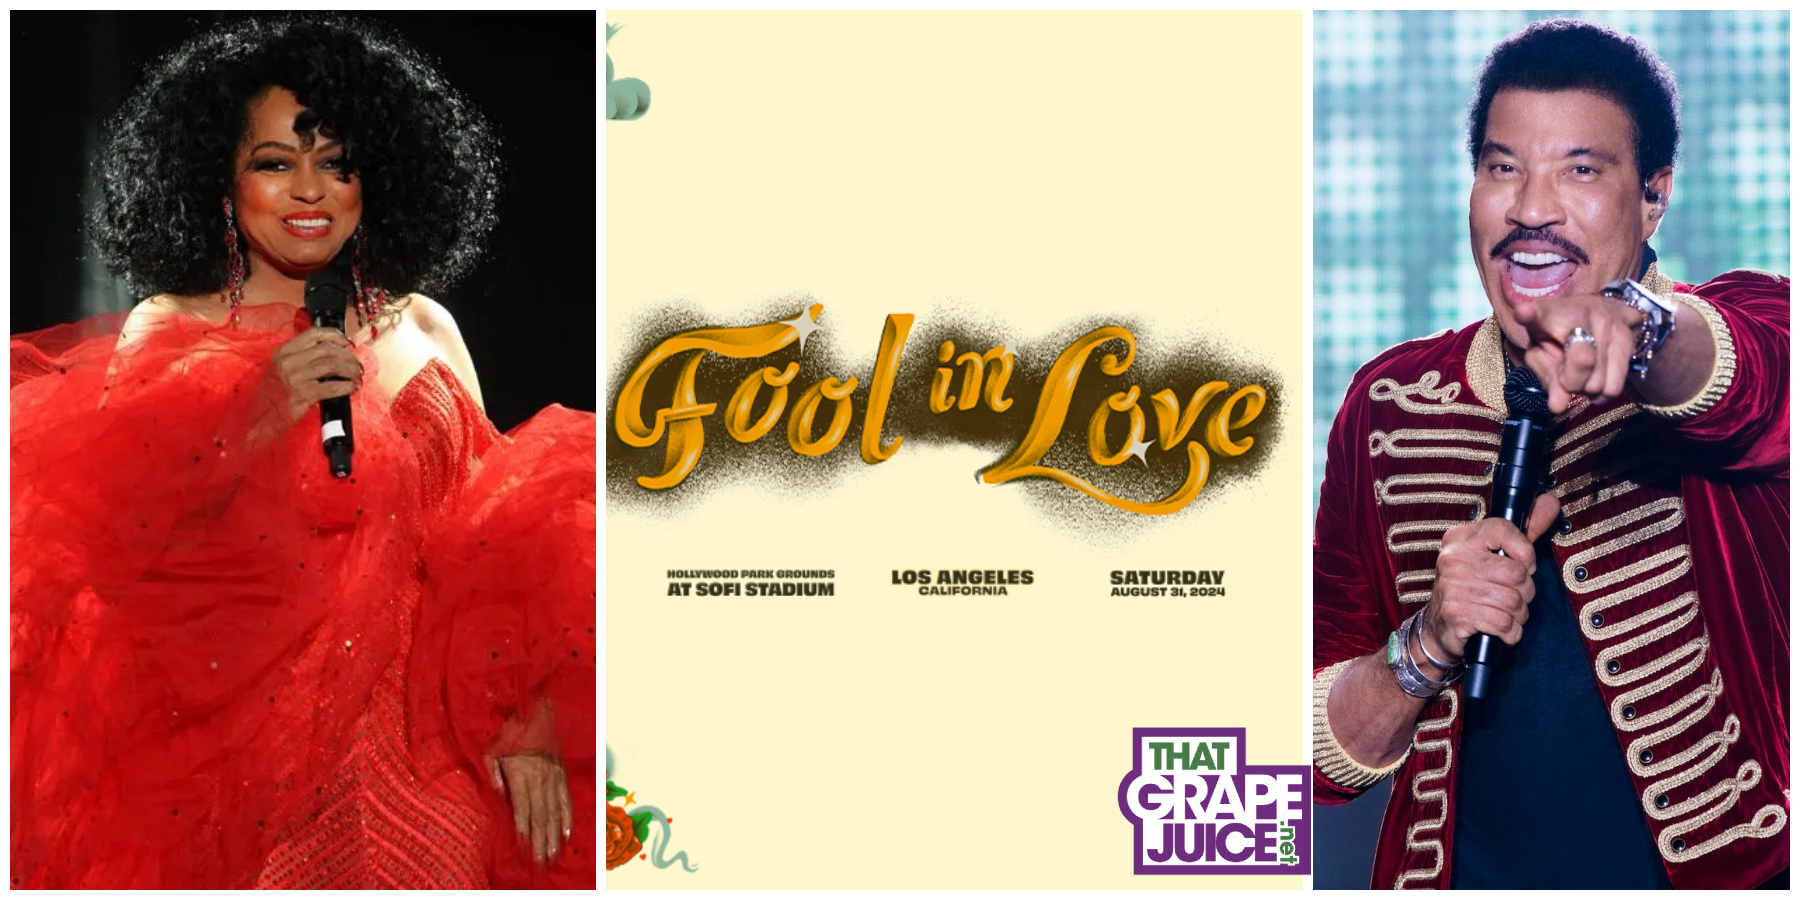 Lionel Richie, Diana Ross, Smokey Robinson, Isley Brothers, Chaka Khan, & Gladys Knight Among Big Names Set for the Inaugural ‘Fool in Love’ Fest